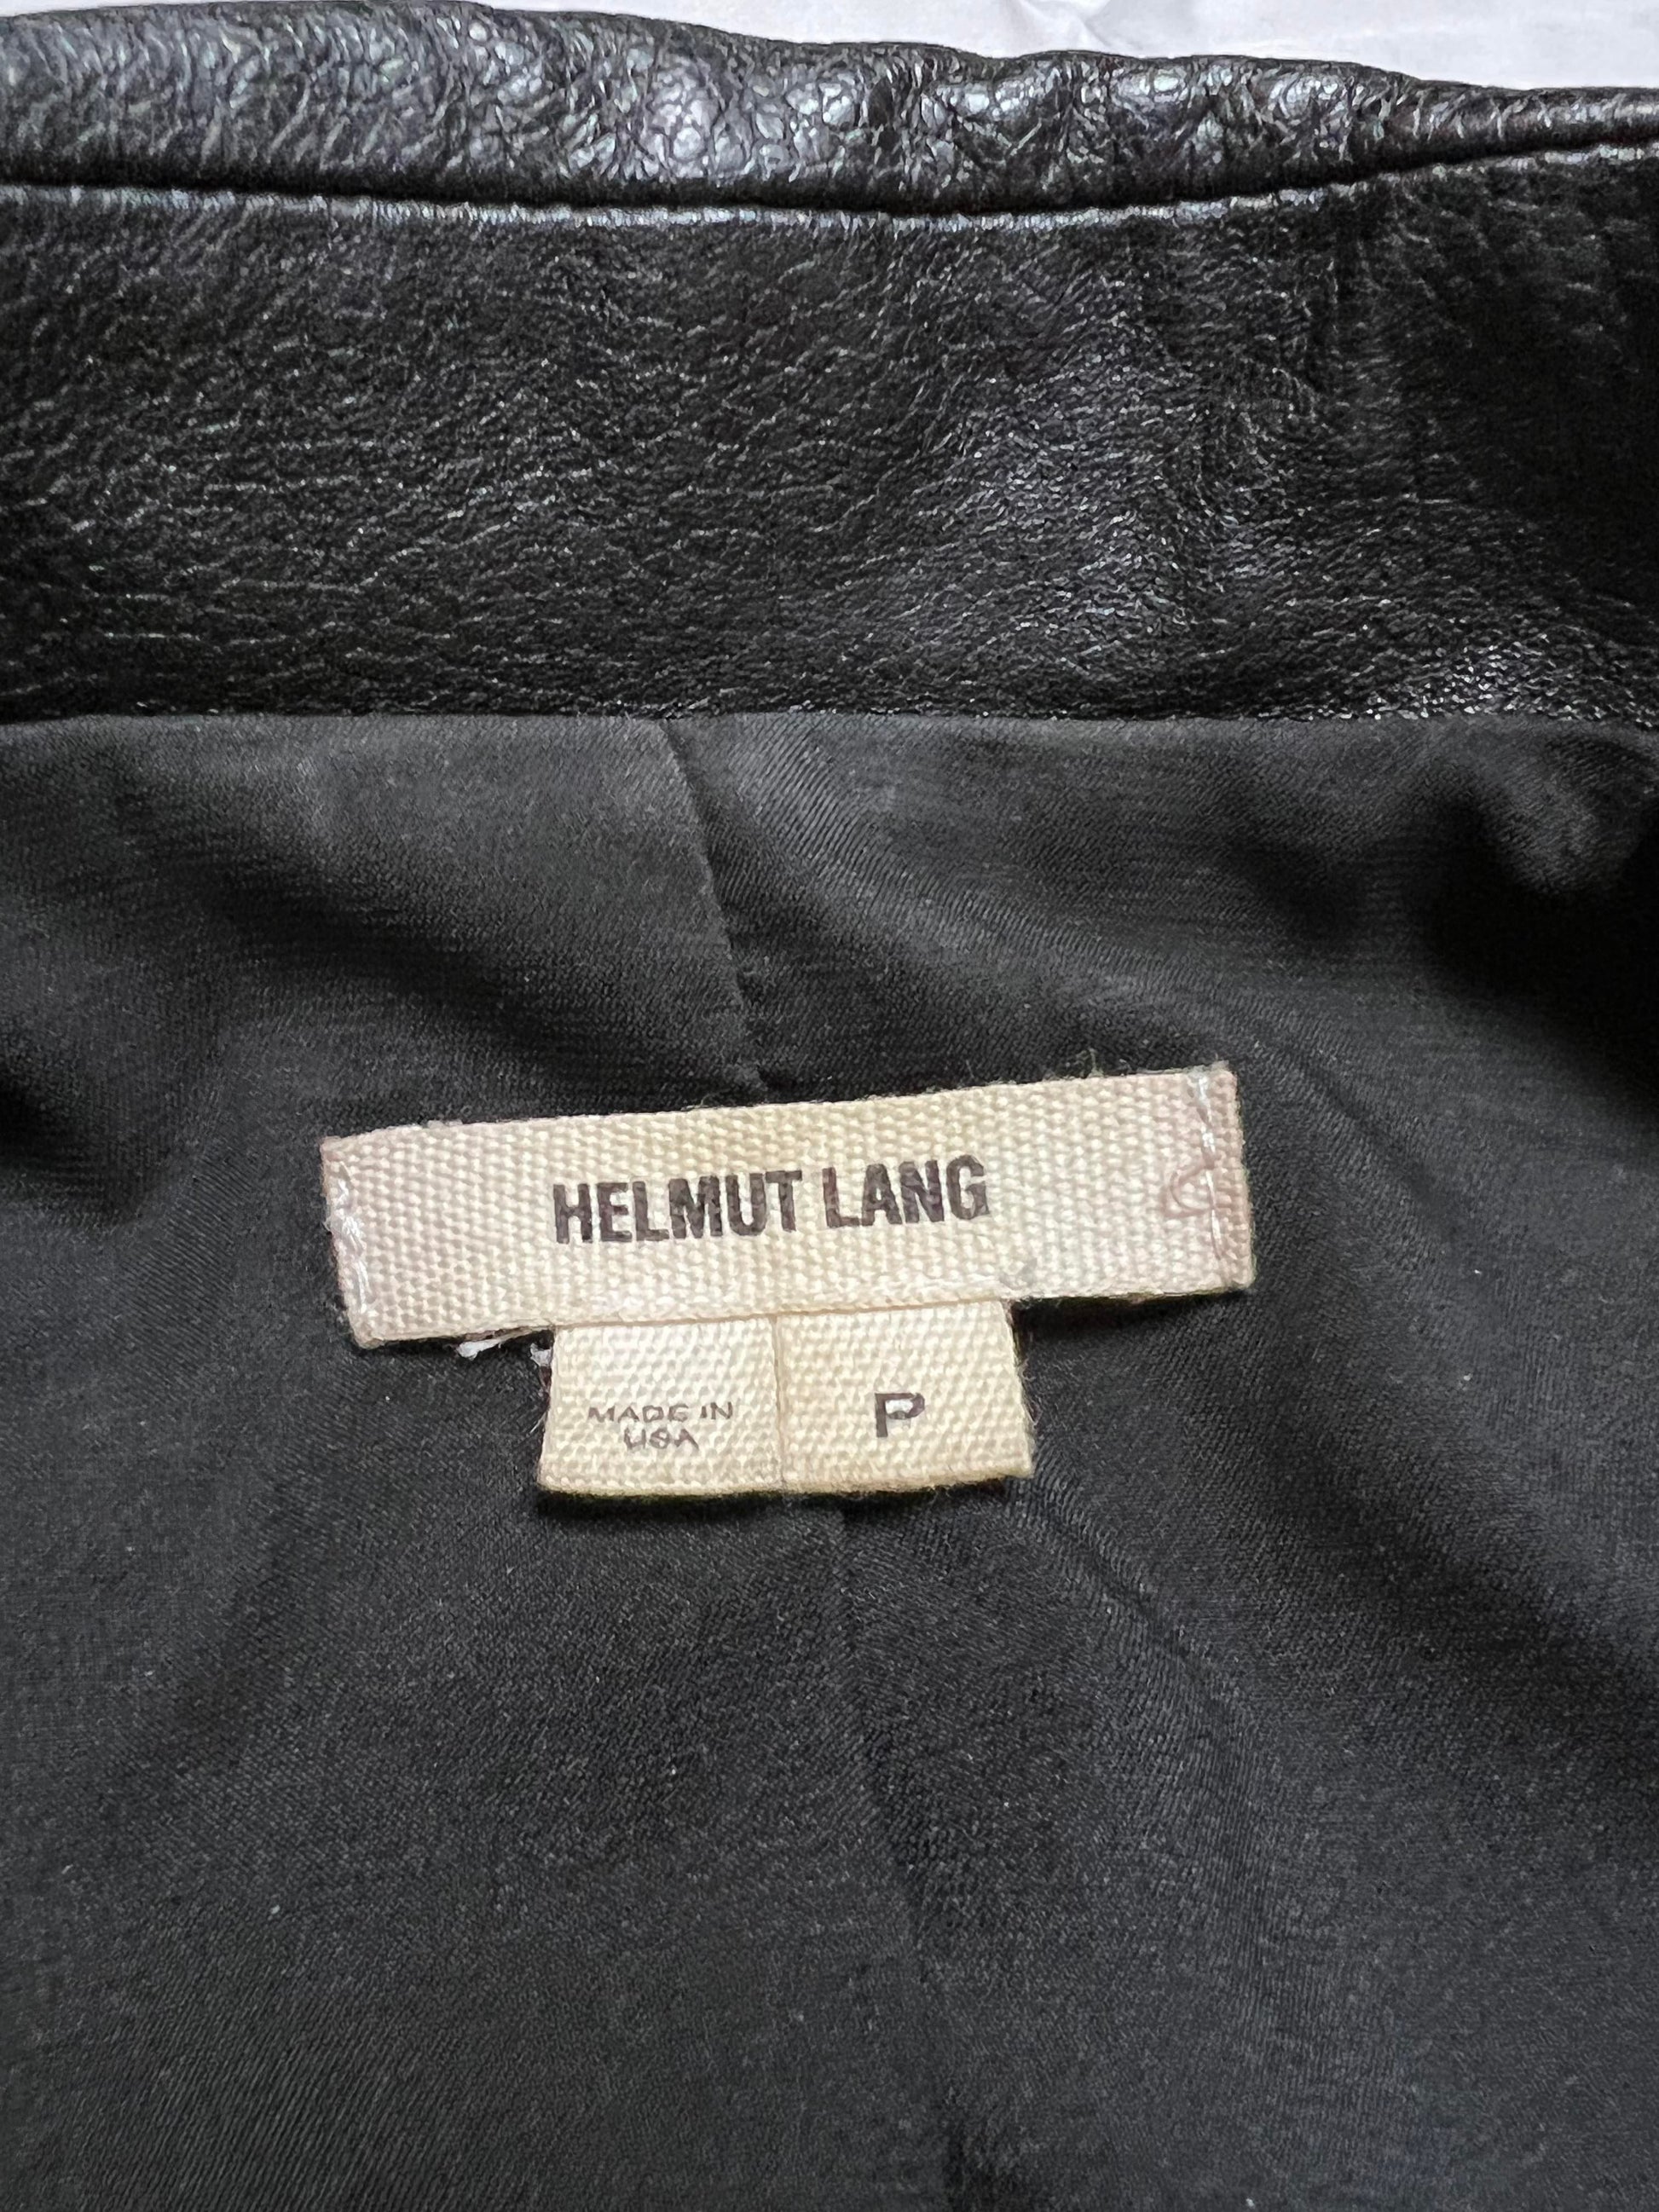 Helmut Lang - Imported Fabric and Leather Zipper Biker Jacket